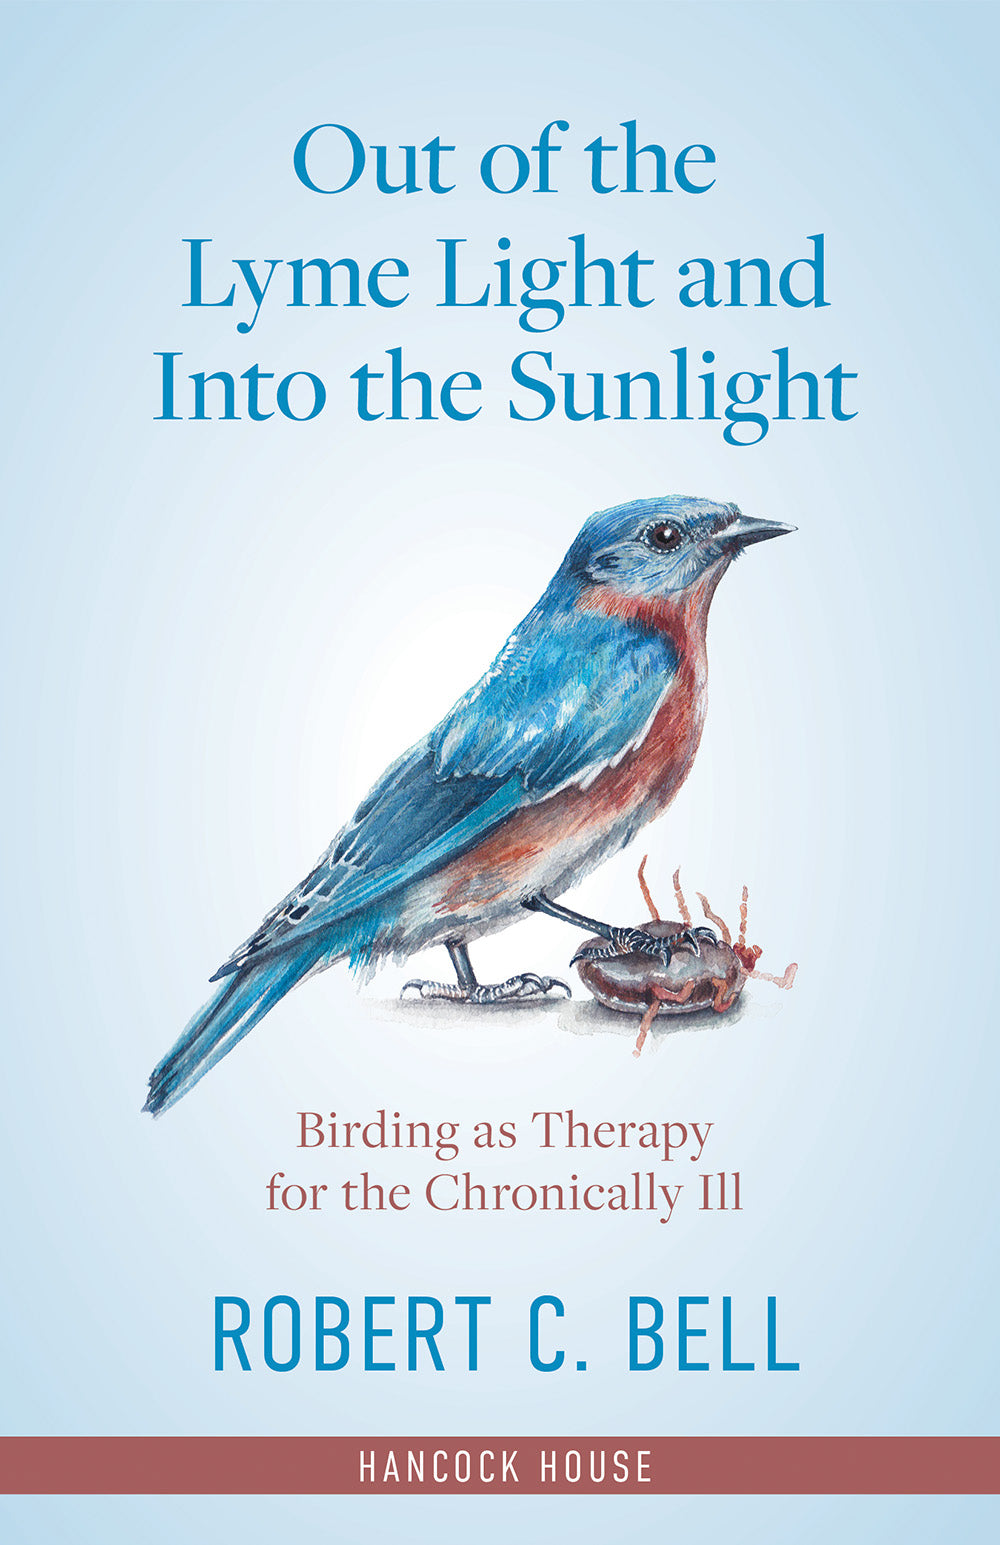 Out of the Lyme Light and Into the Sunlight Book